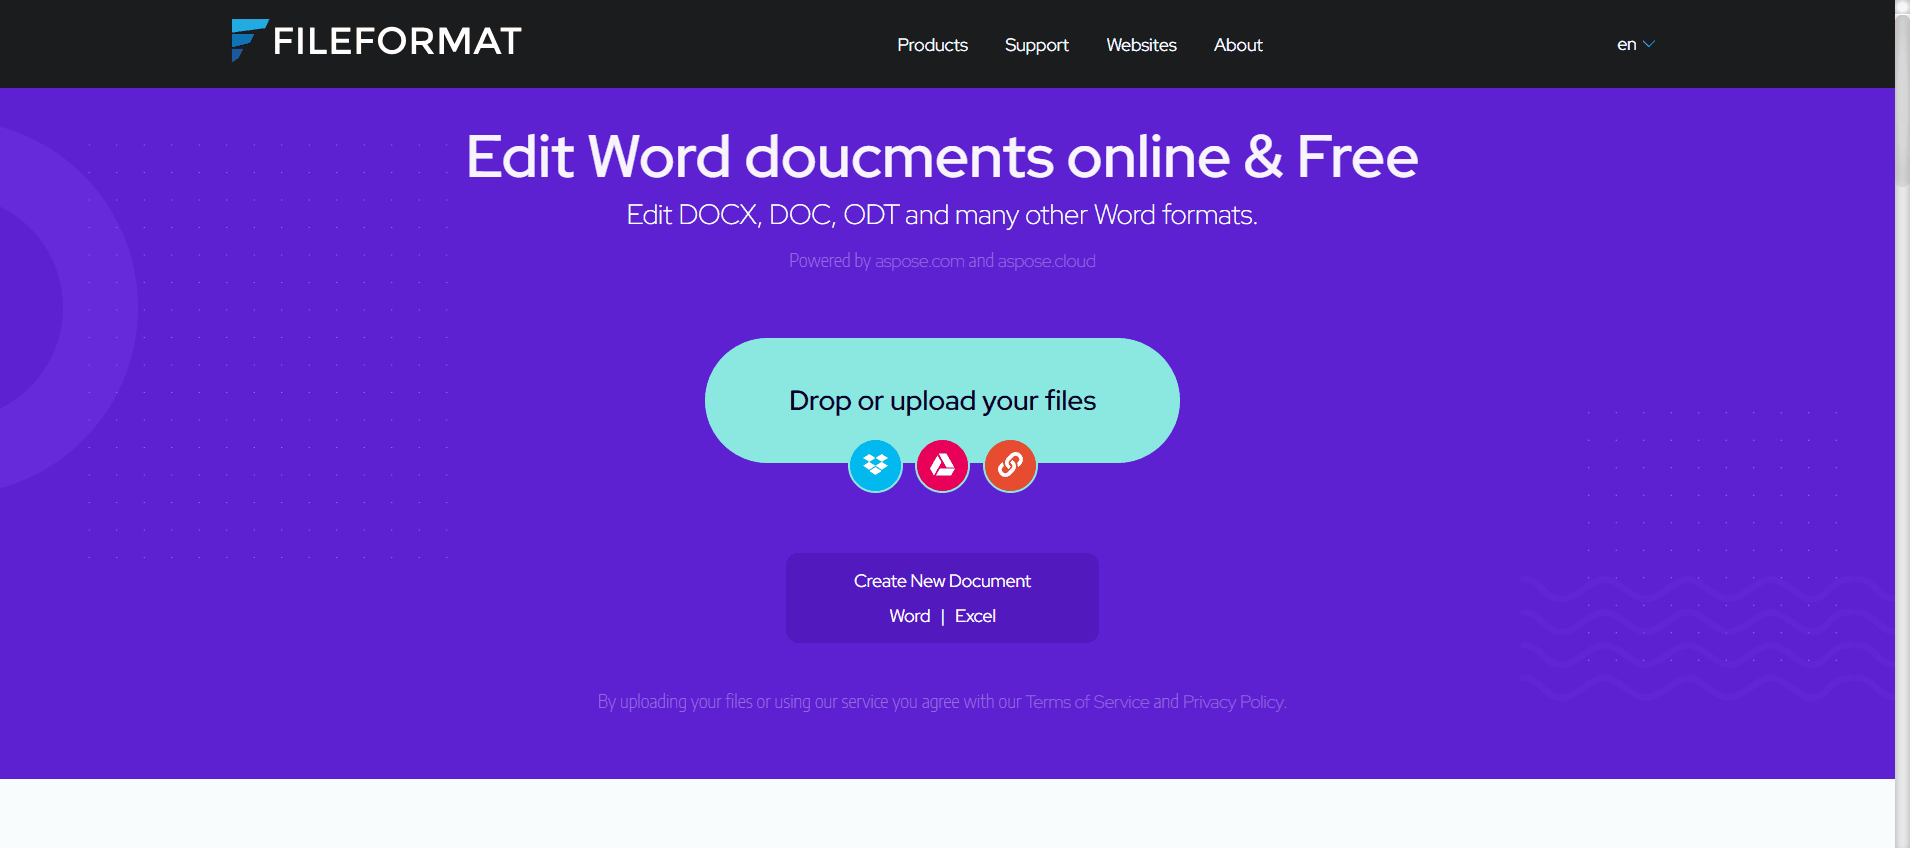 How to edit documents online